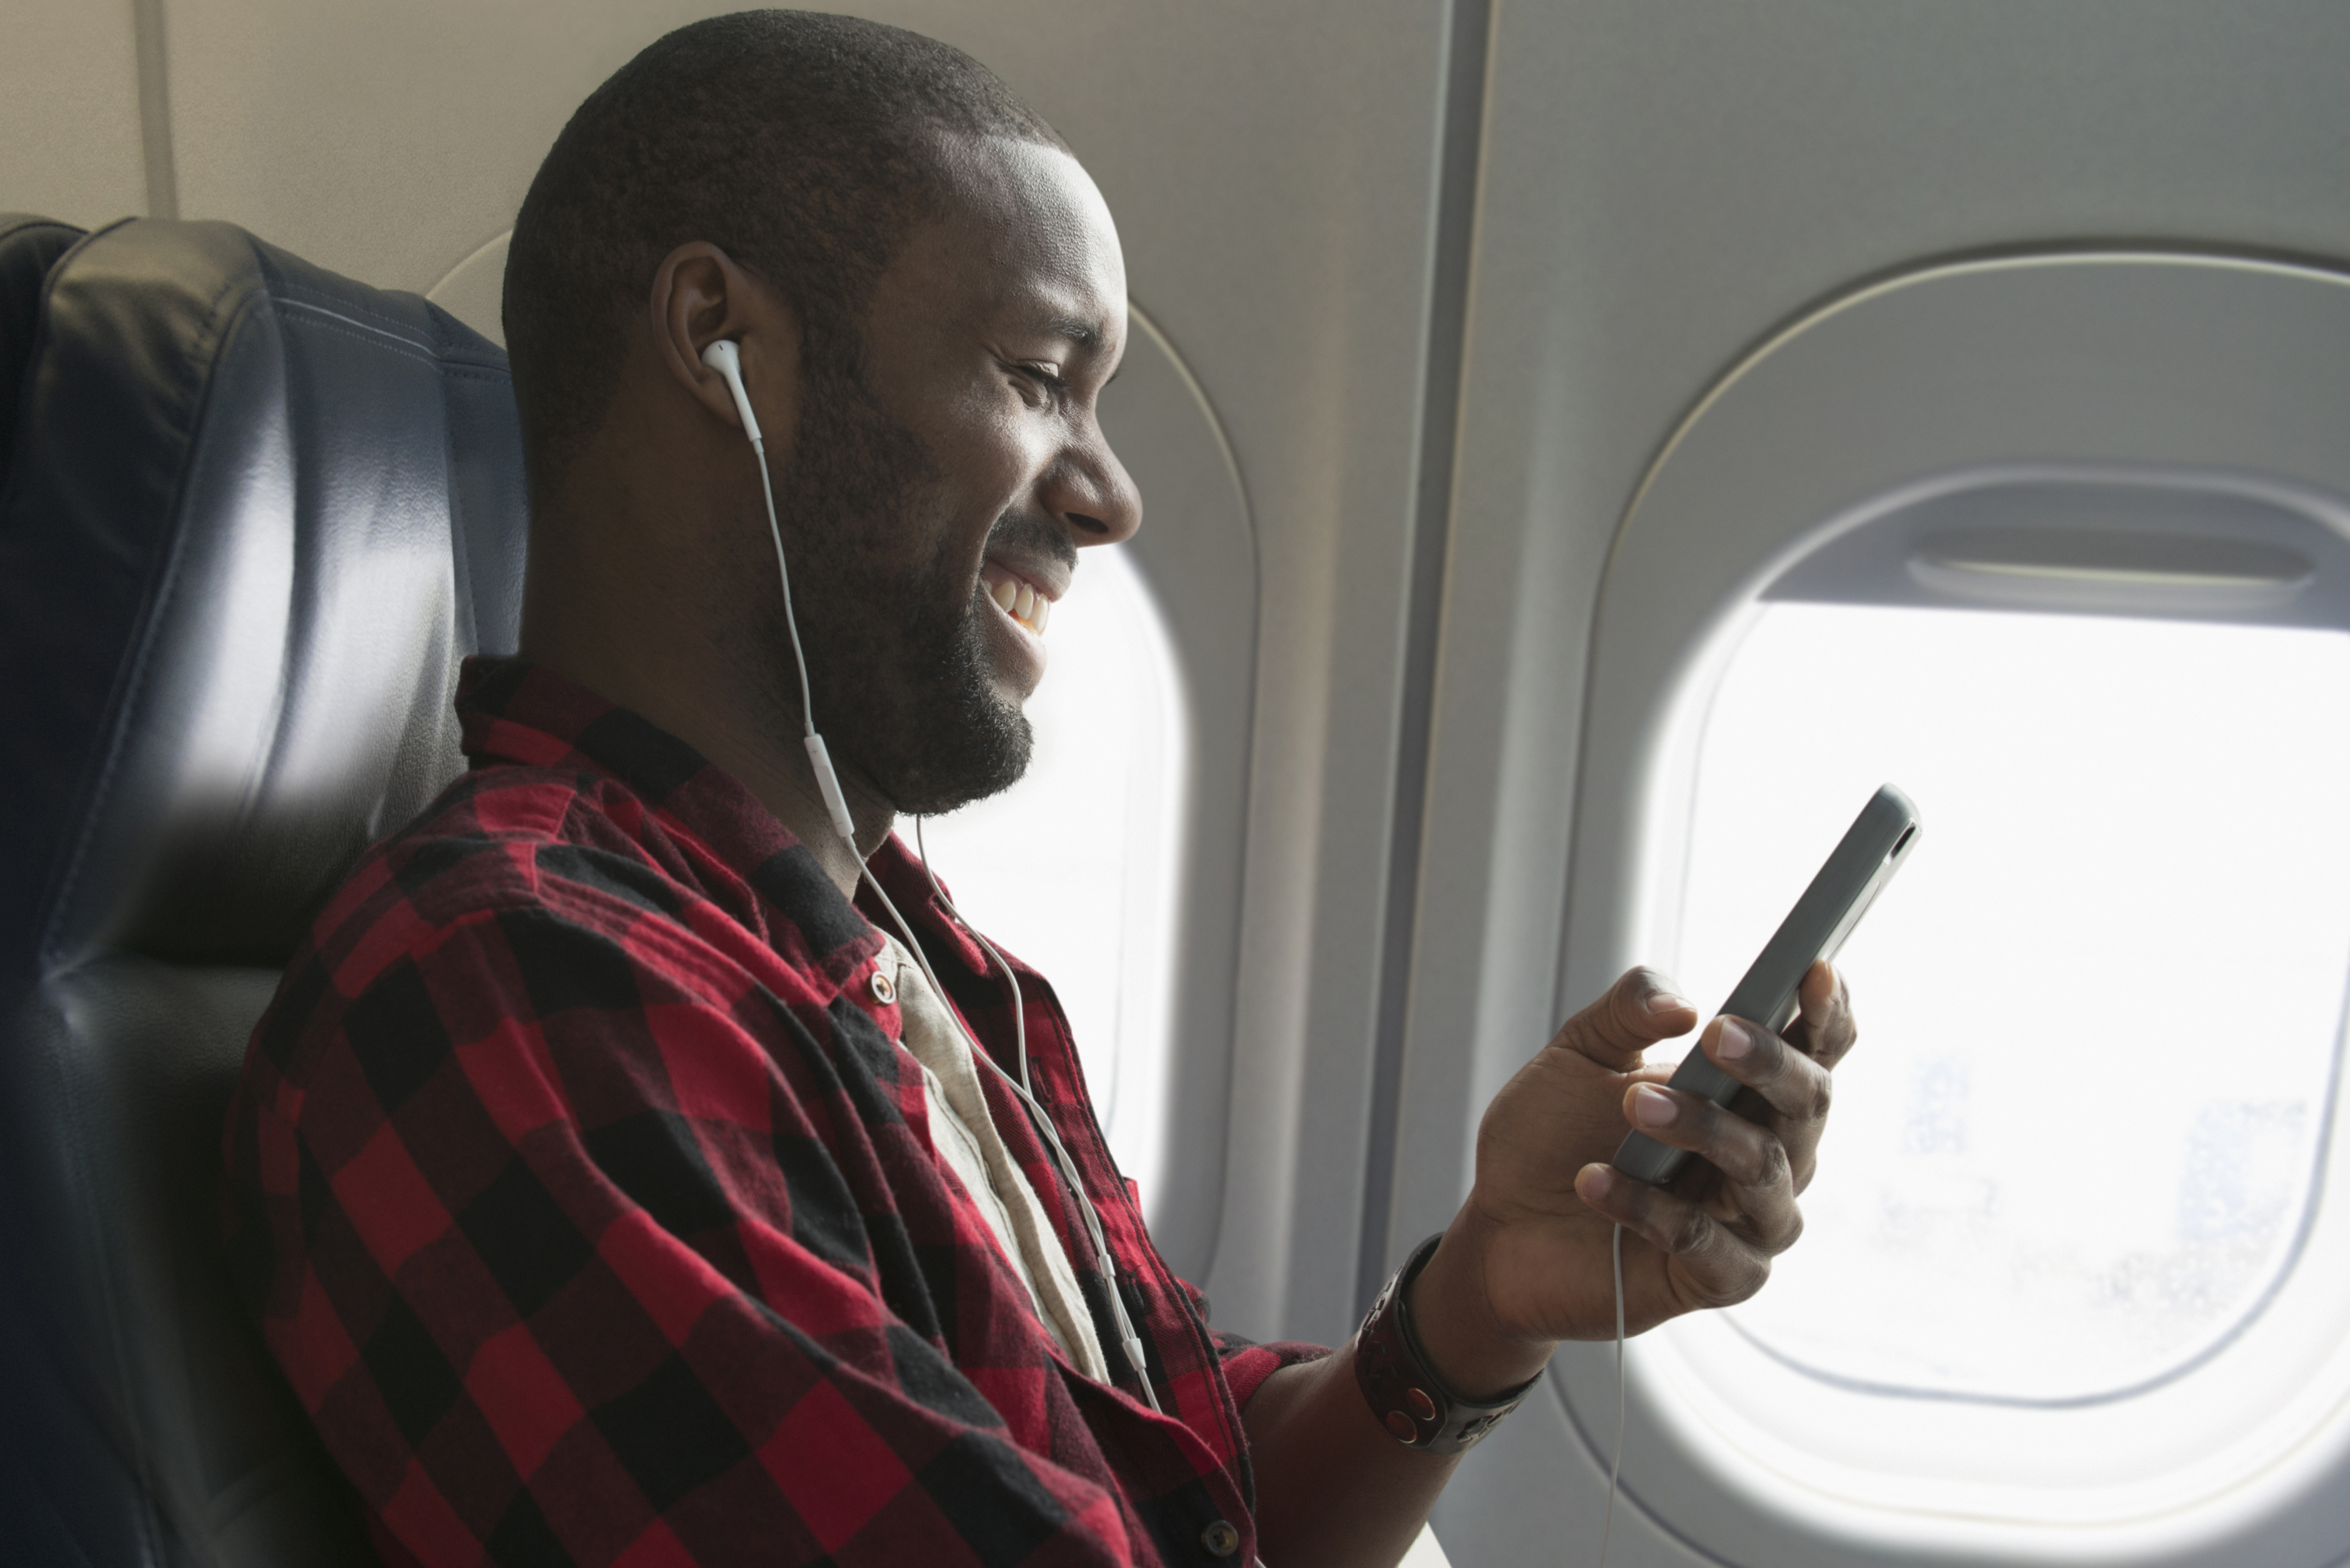 man smiling while on phone on airplane